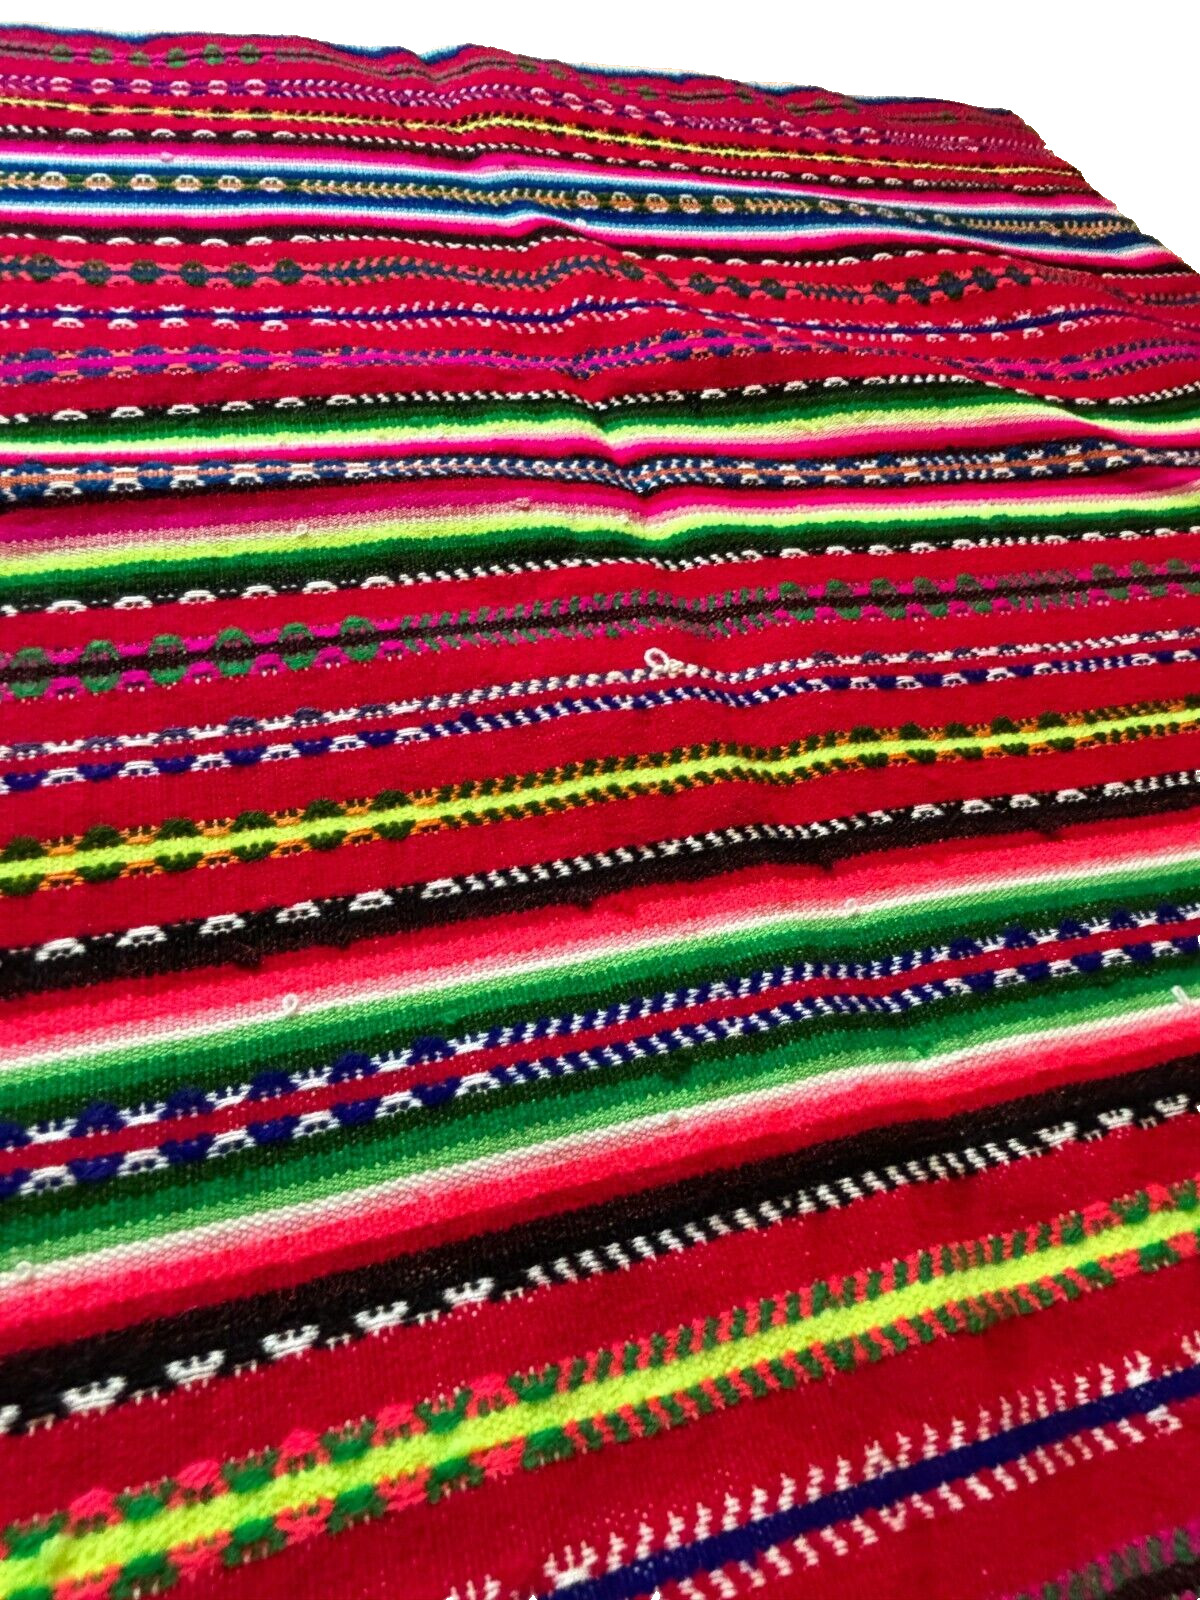 Vintage Hand Woven Loomed Peruvian Andes Pullo Carrying Blanket Huancayo 43x43